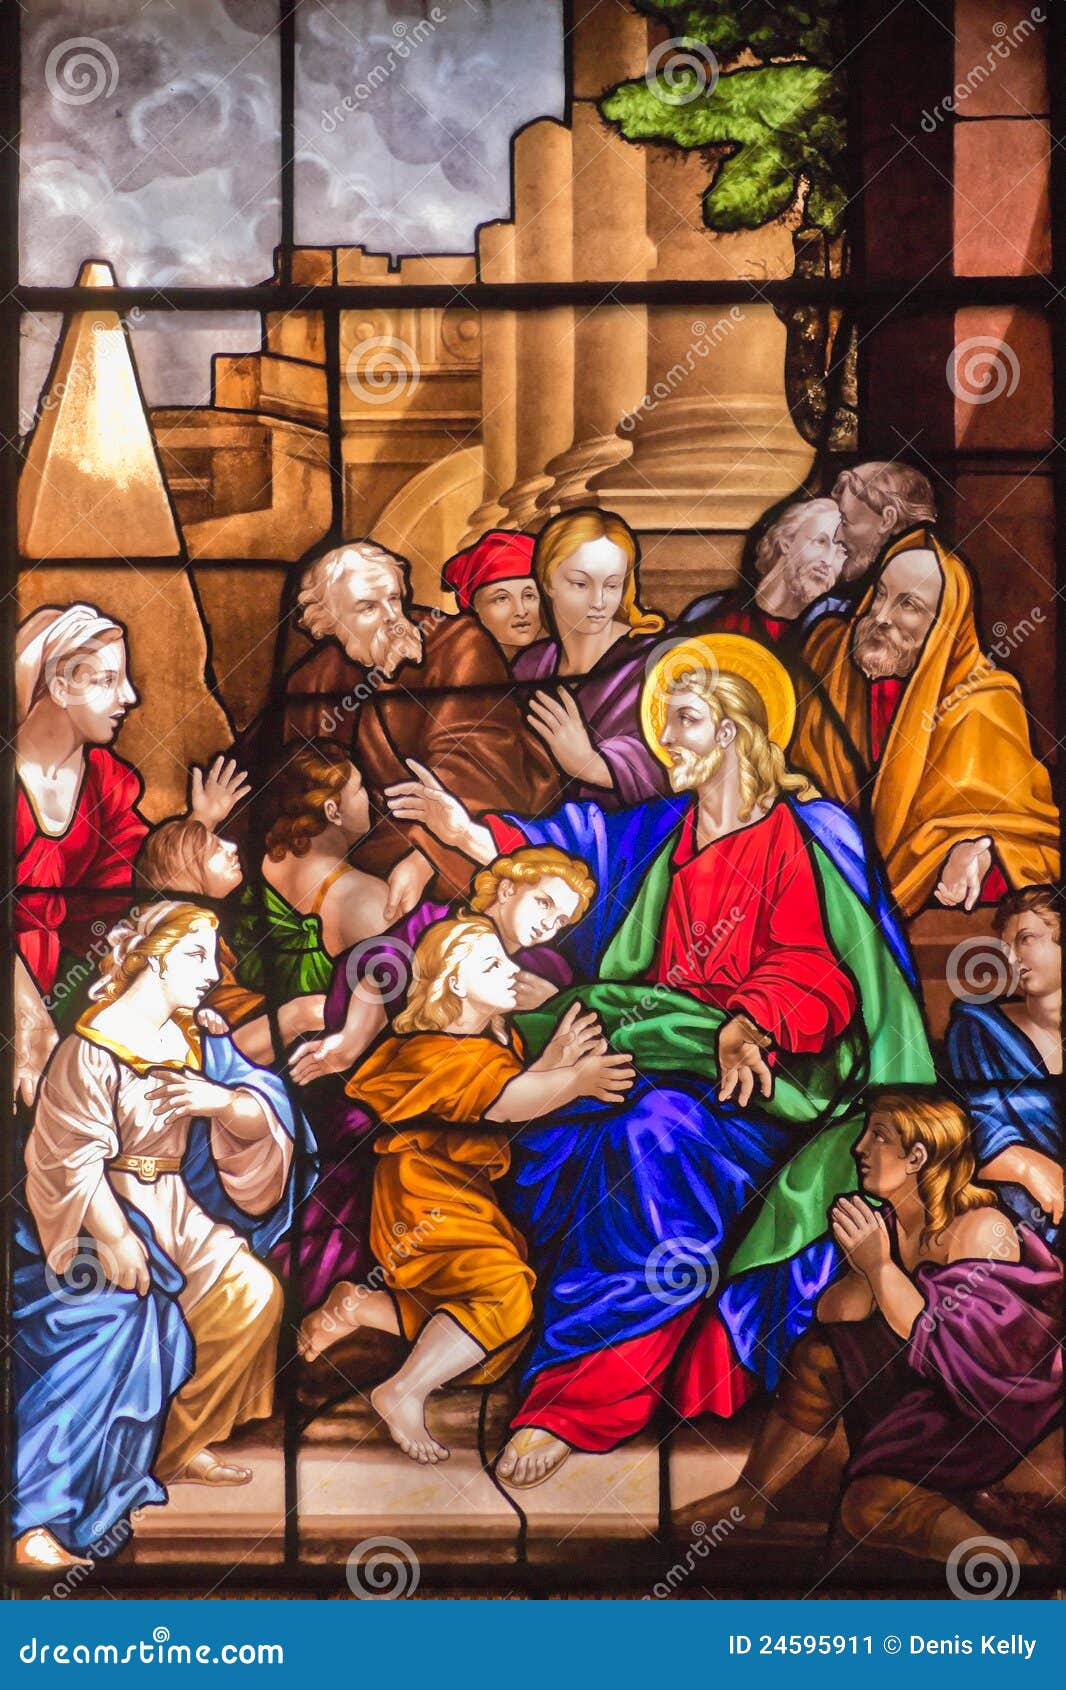 Jesus Christ and Children Stained Glass Window Stock Image - Image ...